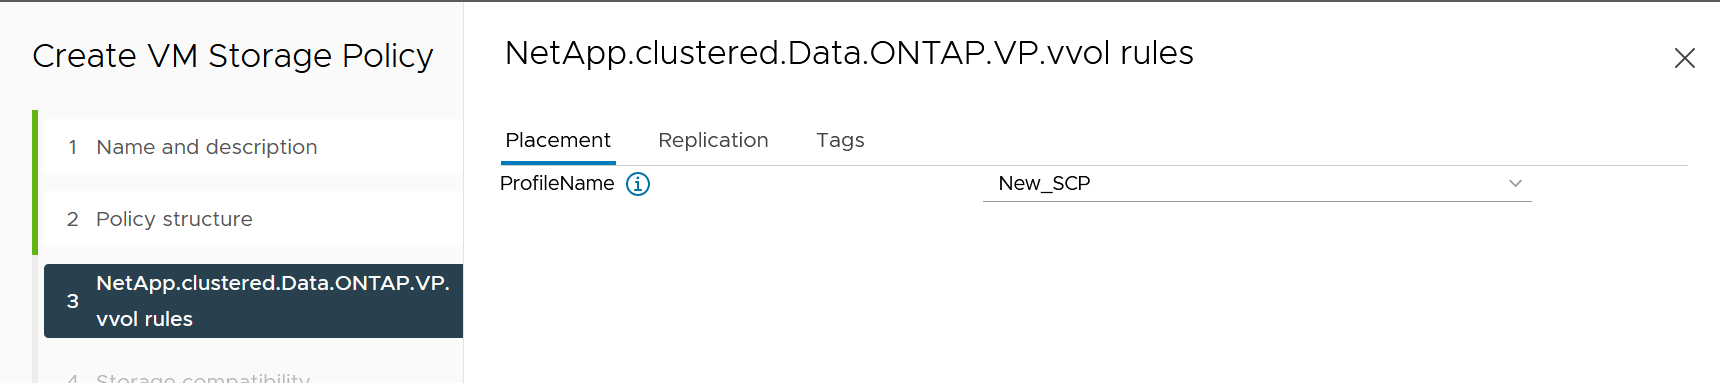 « VM Storage Policy Creation with ONTAP Tools VASA Provider 9.10 », 300